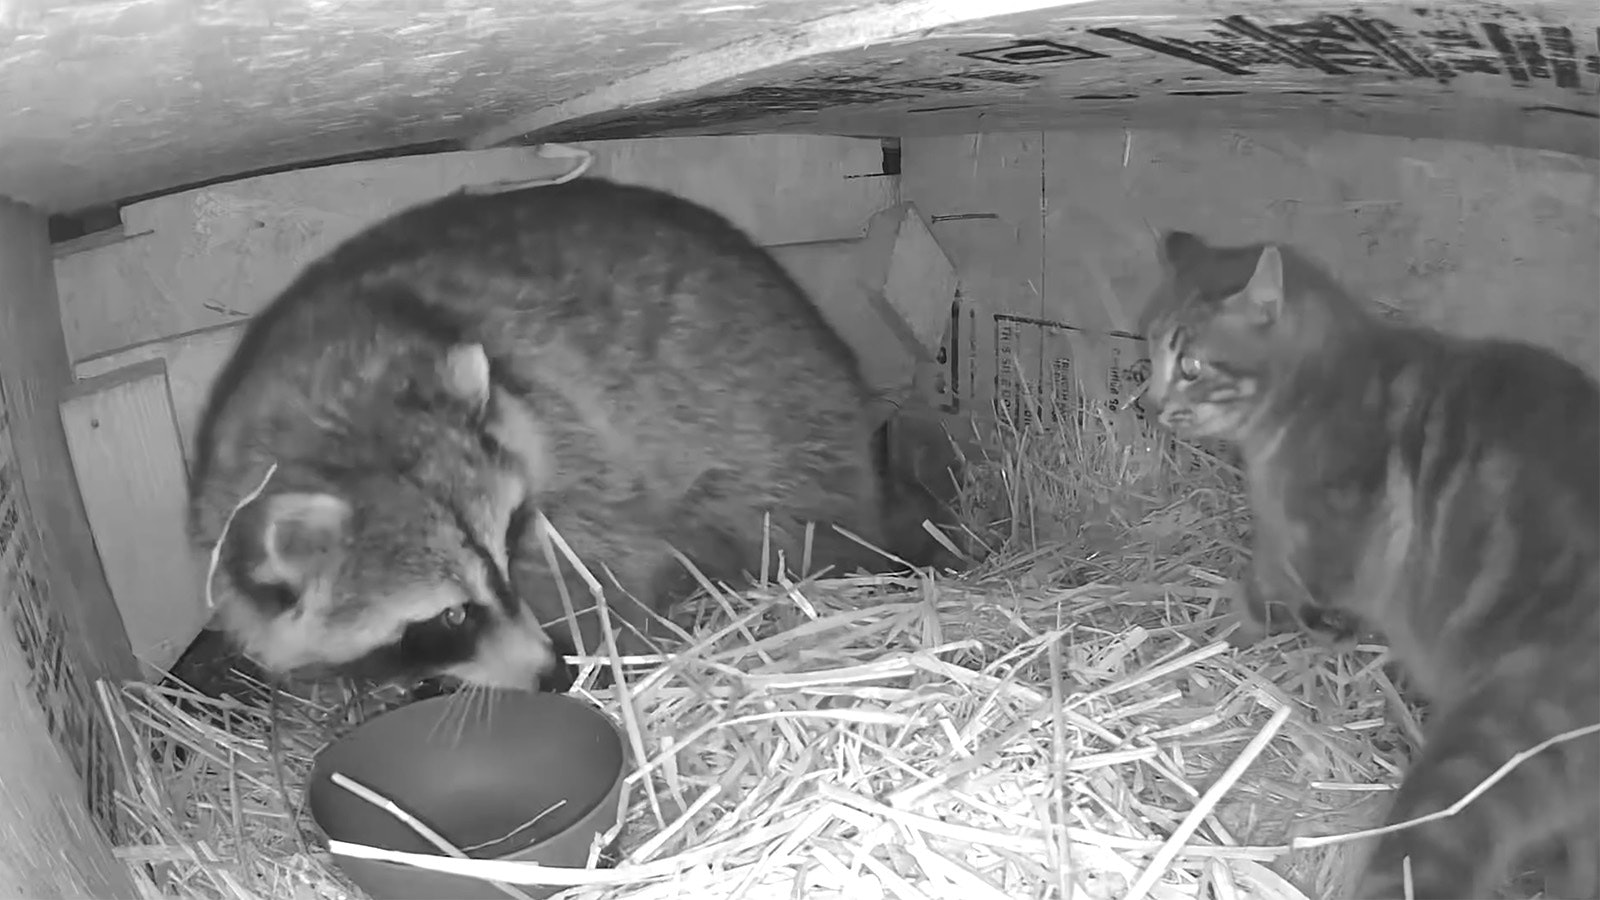 Finally fed up with raccoons raiding his food and shelter, a young Wyoming barn cat put the smackdown on a raccoon twice its size.